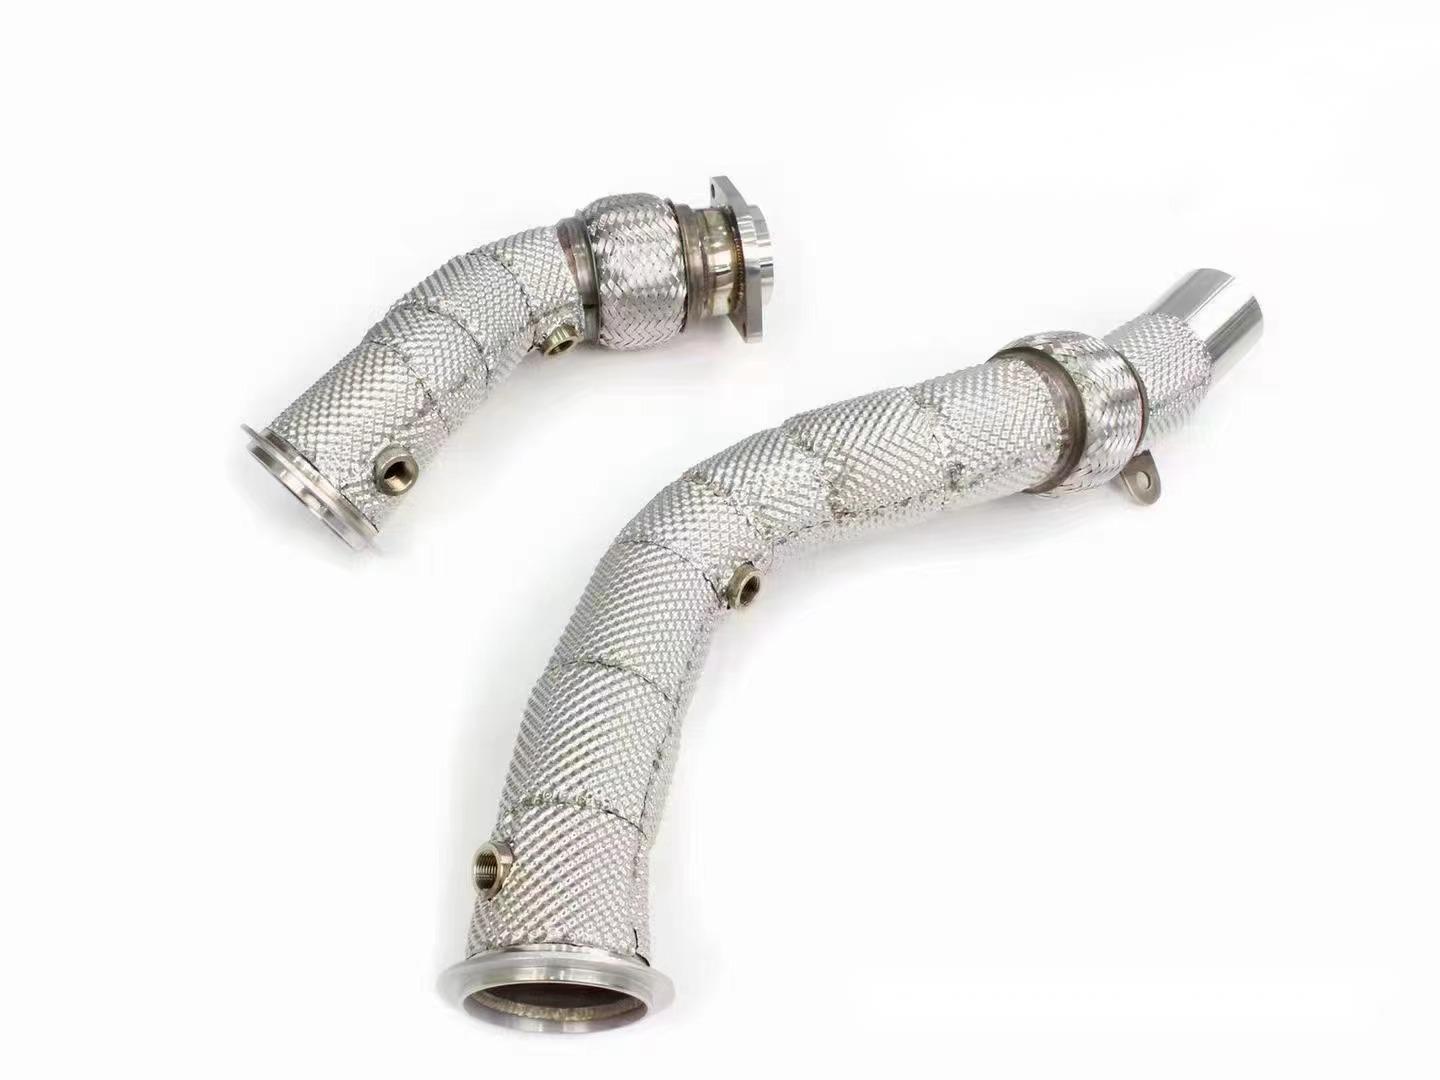 BMW M4 exhaust downpipe